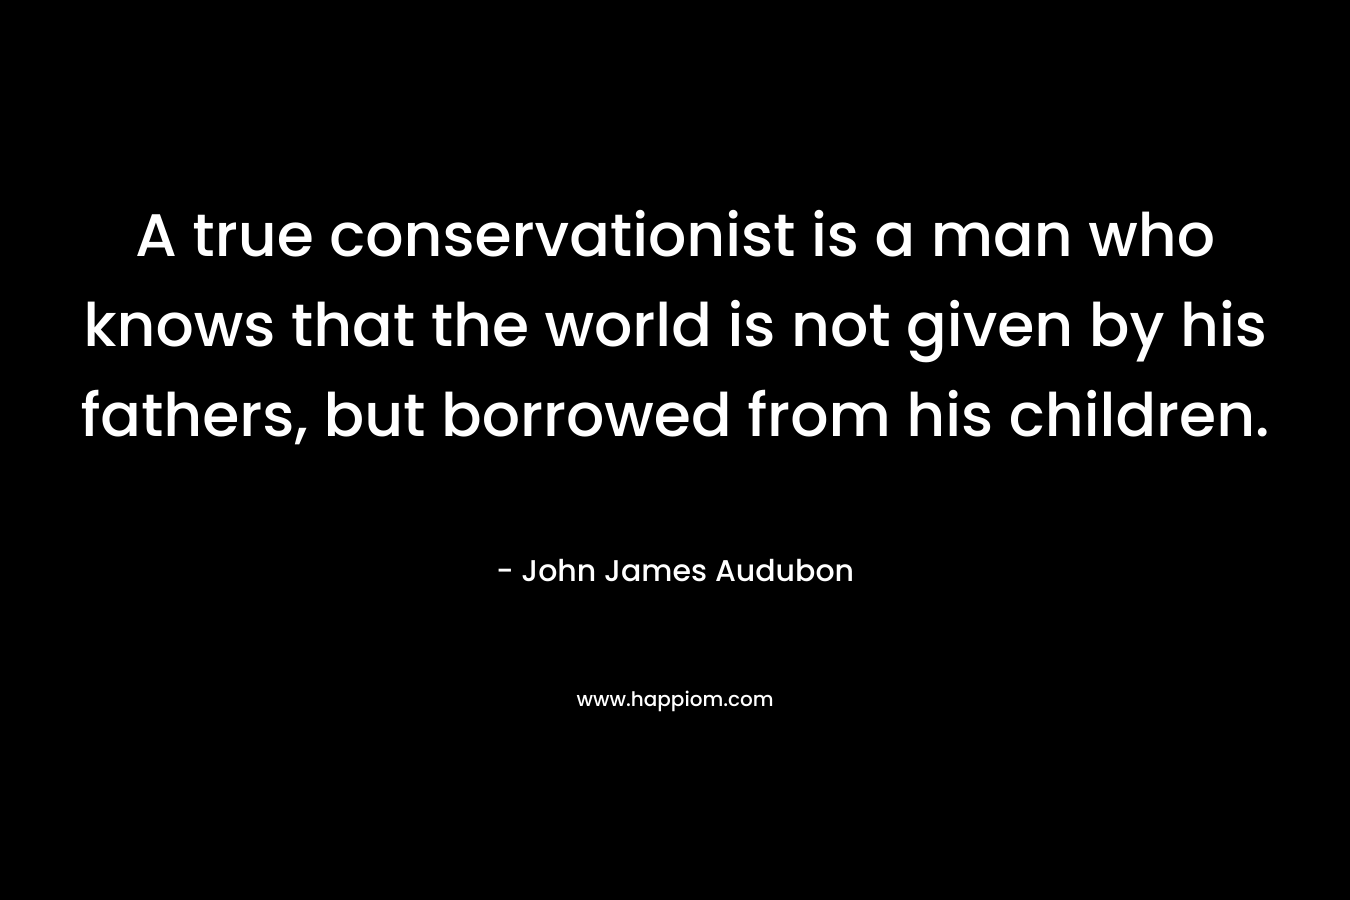 A true conservationist is a man who knows that the world is not given by his fathers, but borrowed from his children.